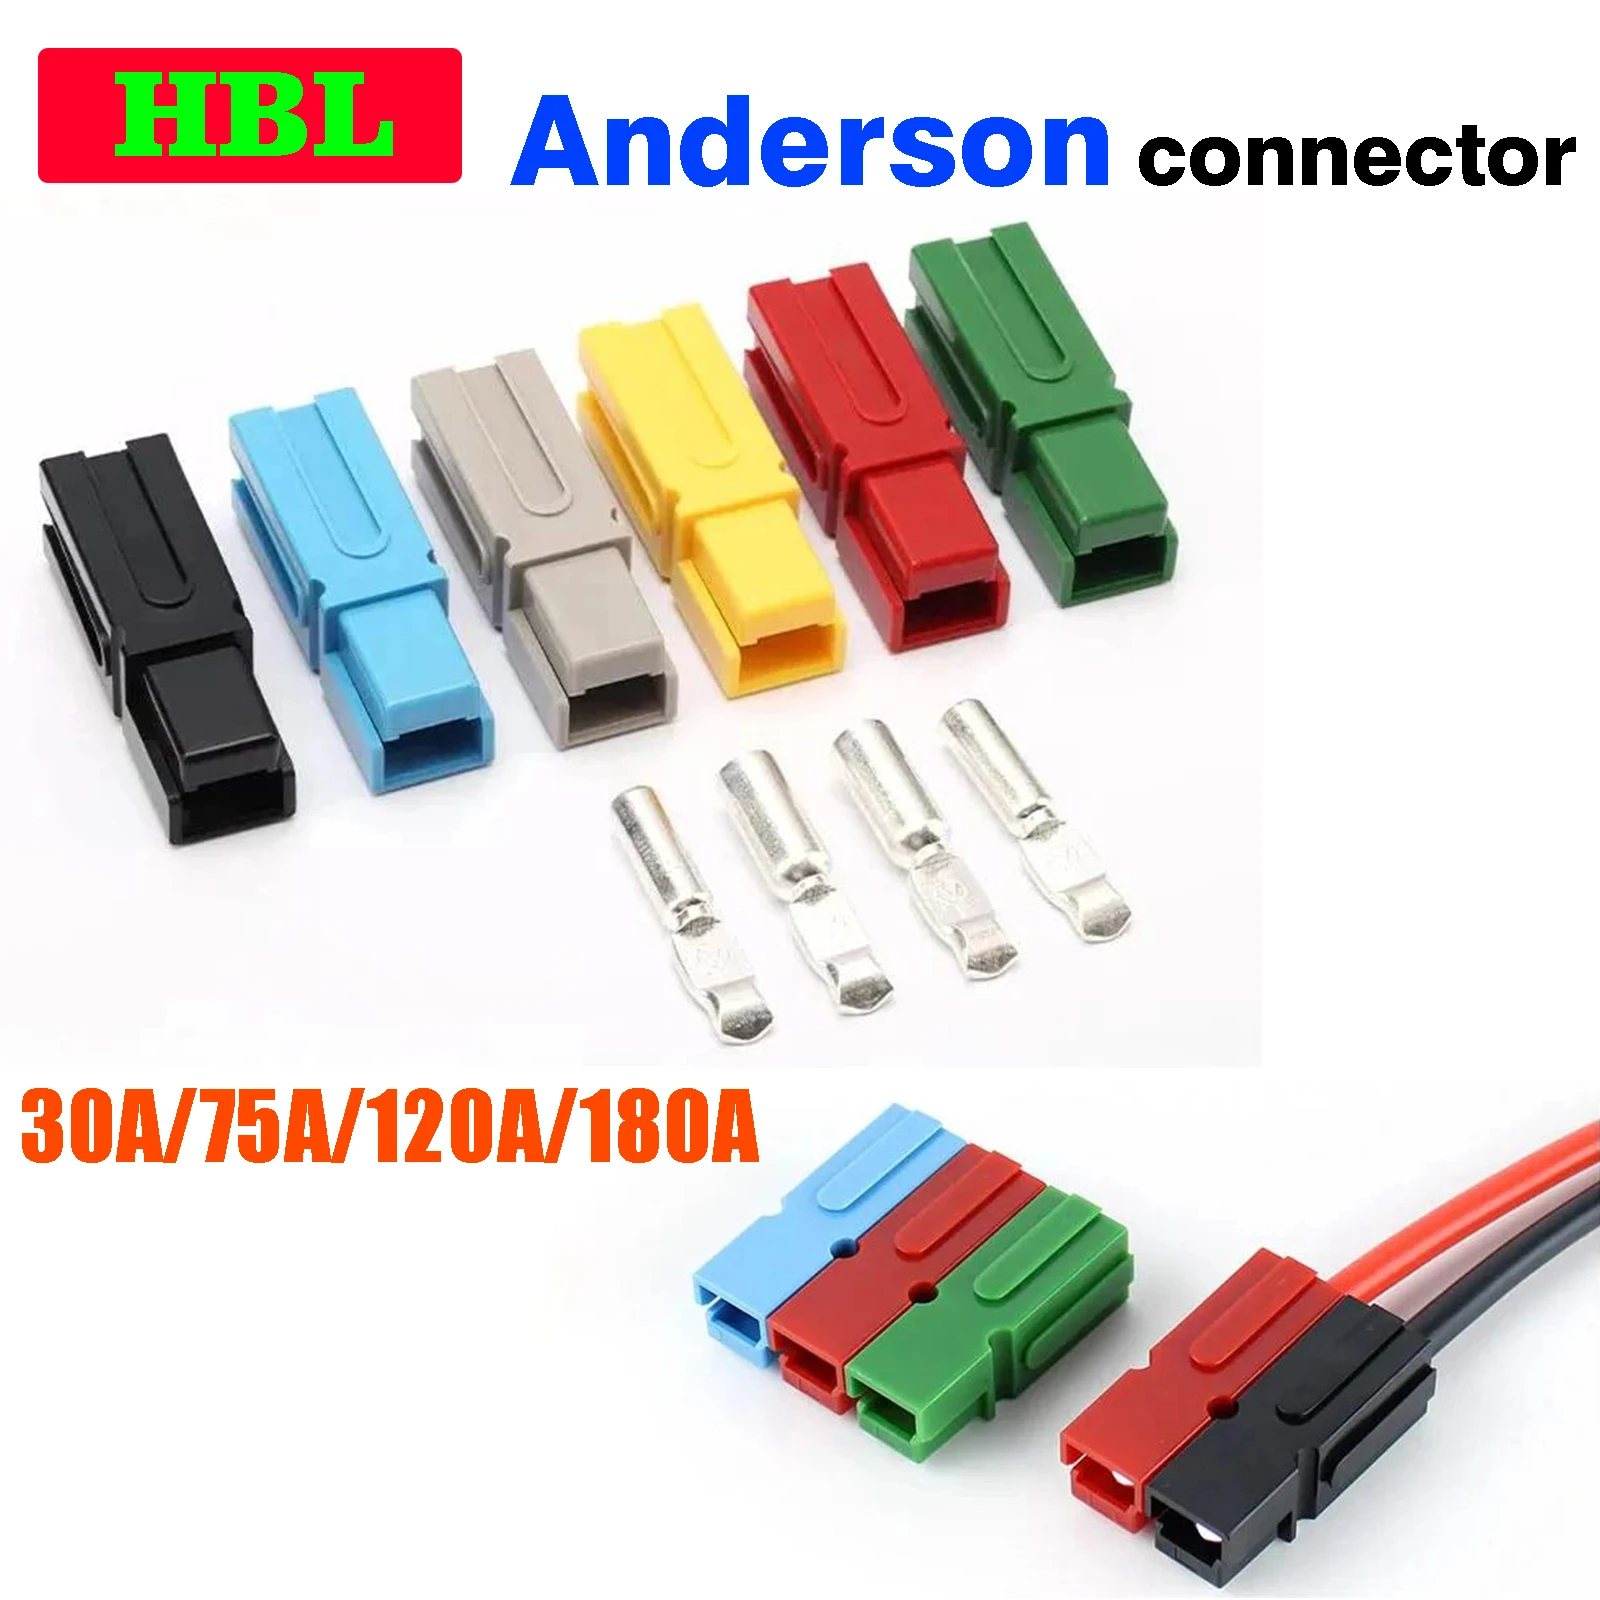 

30A 75A 120A 180A 600V For Anderson Single Pole Plug Forklift Marine Power Connector Electric Power Vehicles Photovoltaic System